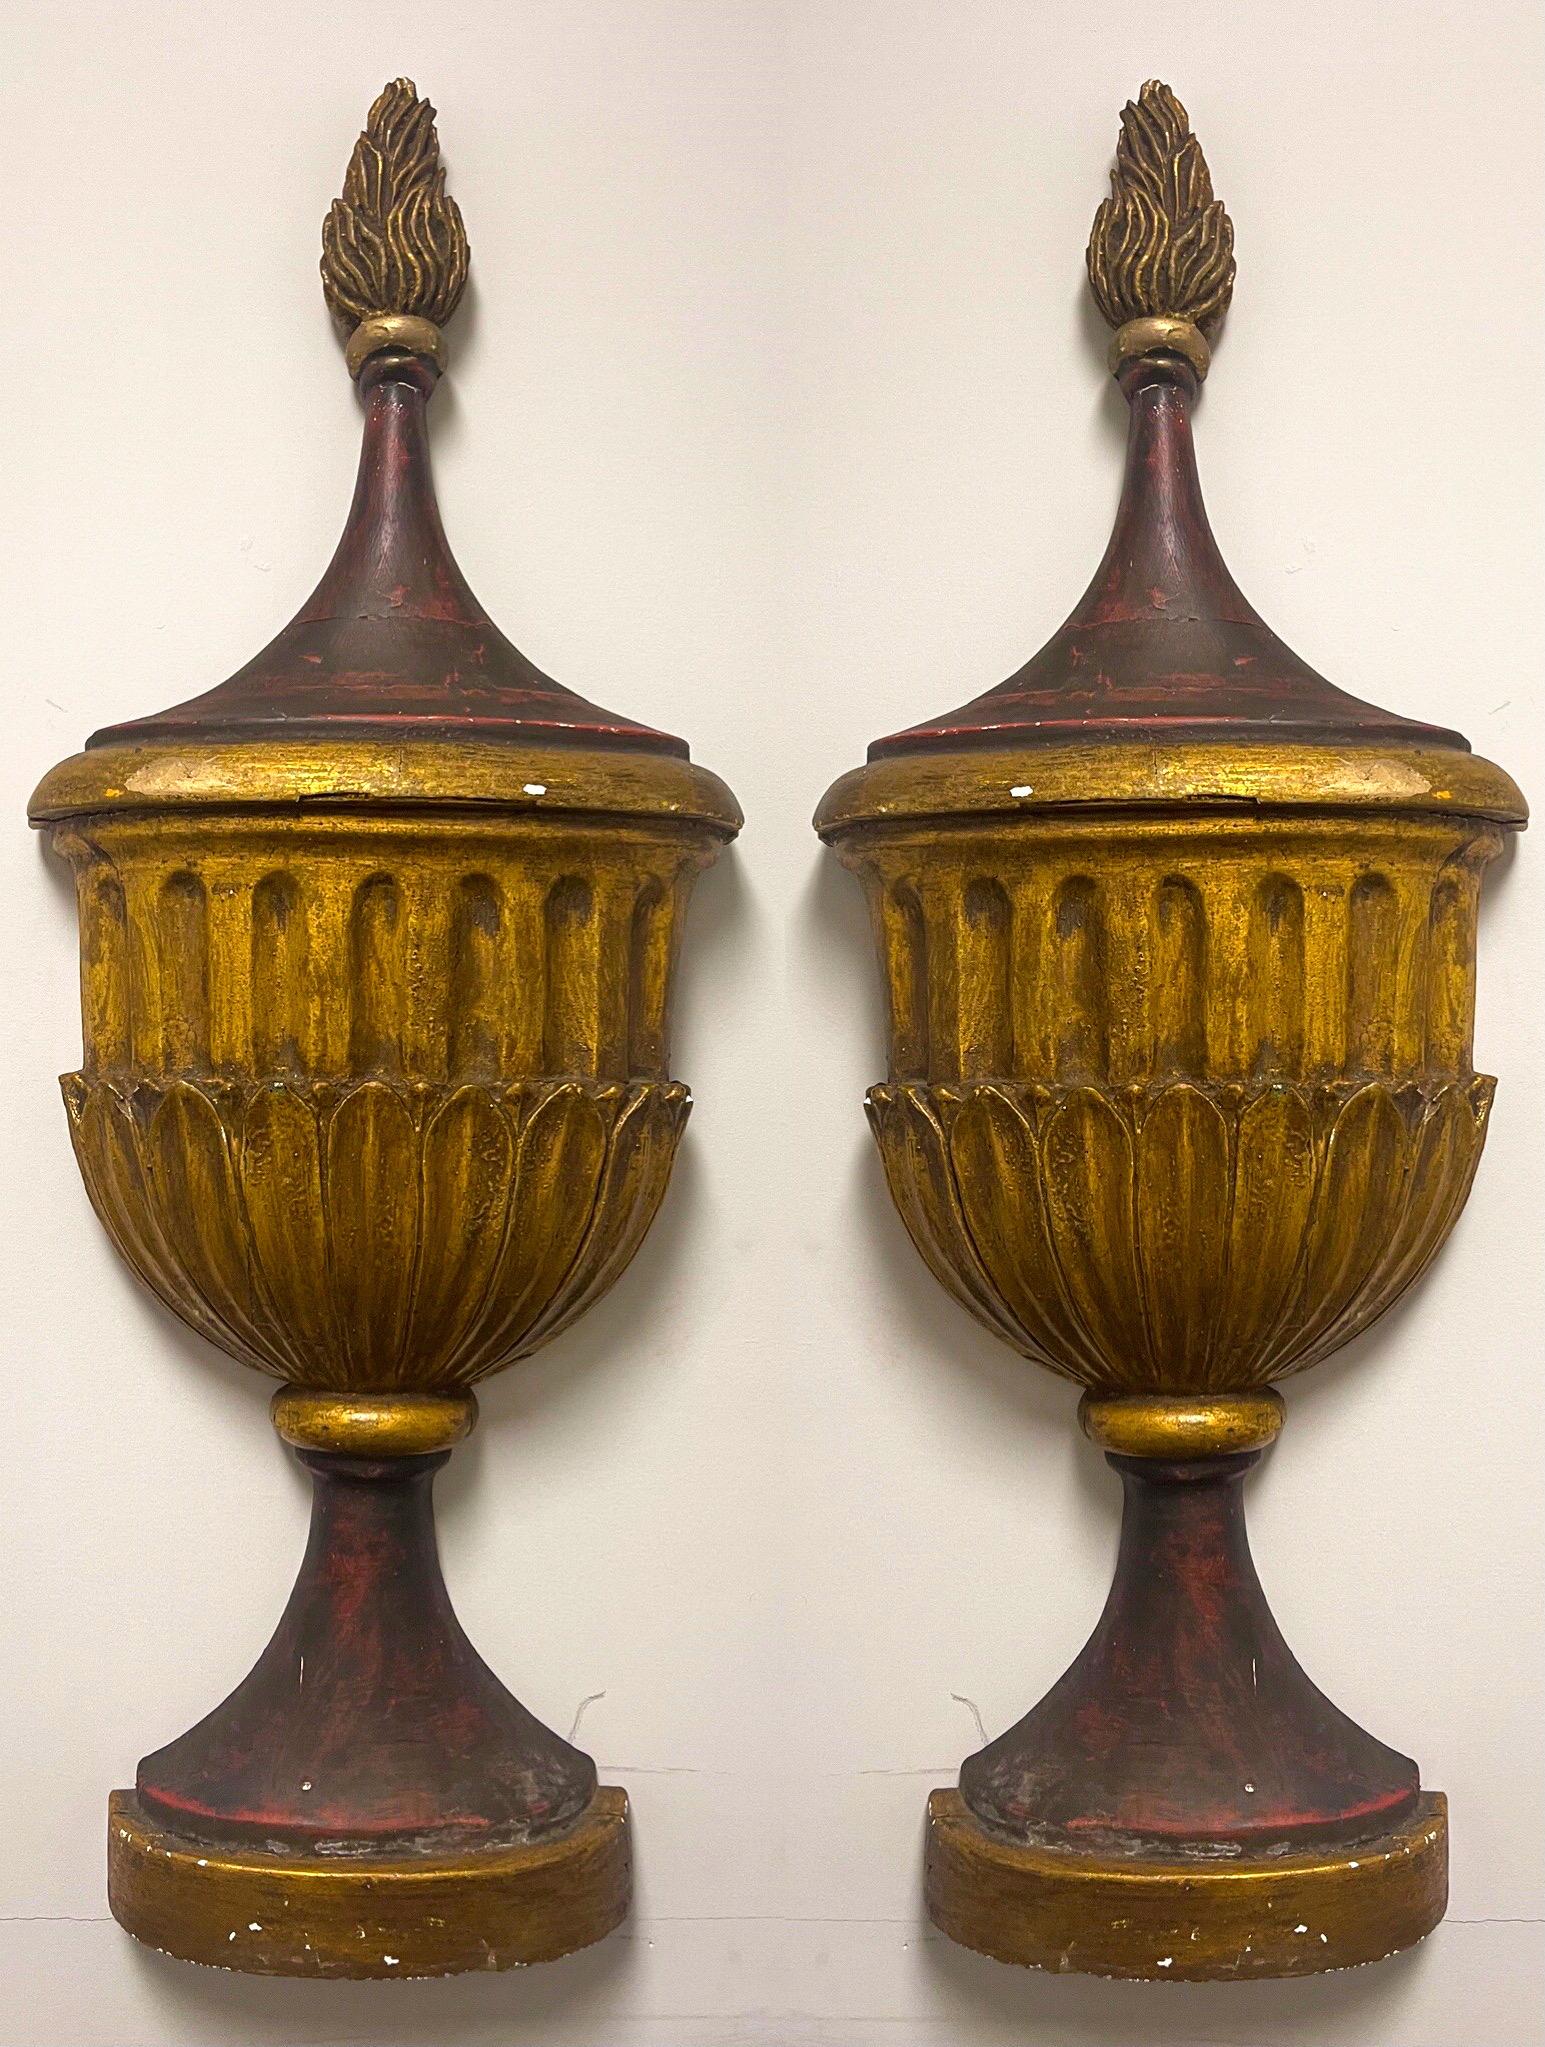 This is an incredible pair of wall mounted Italian neo-classical style urns. They appear to be gilded and painted gesso over cast plaster. They are large in scale and unmarked. The urns date to at least the middle of the 20th century.